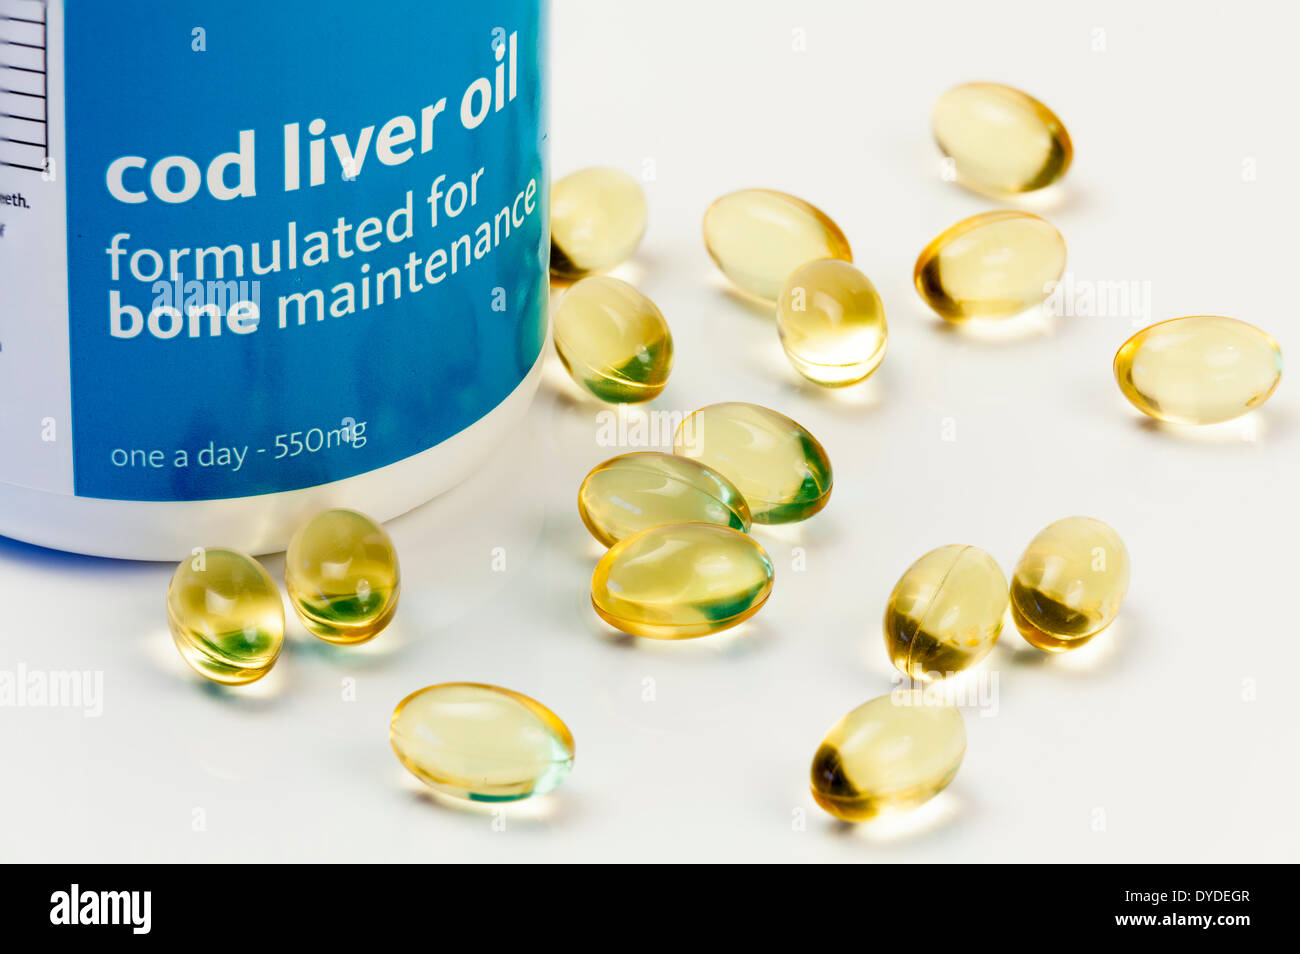 Close up studio still life of cod liver oil capsules and container. Stock Photo